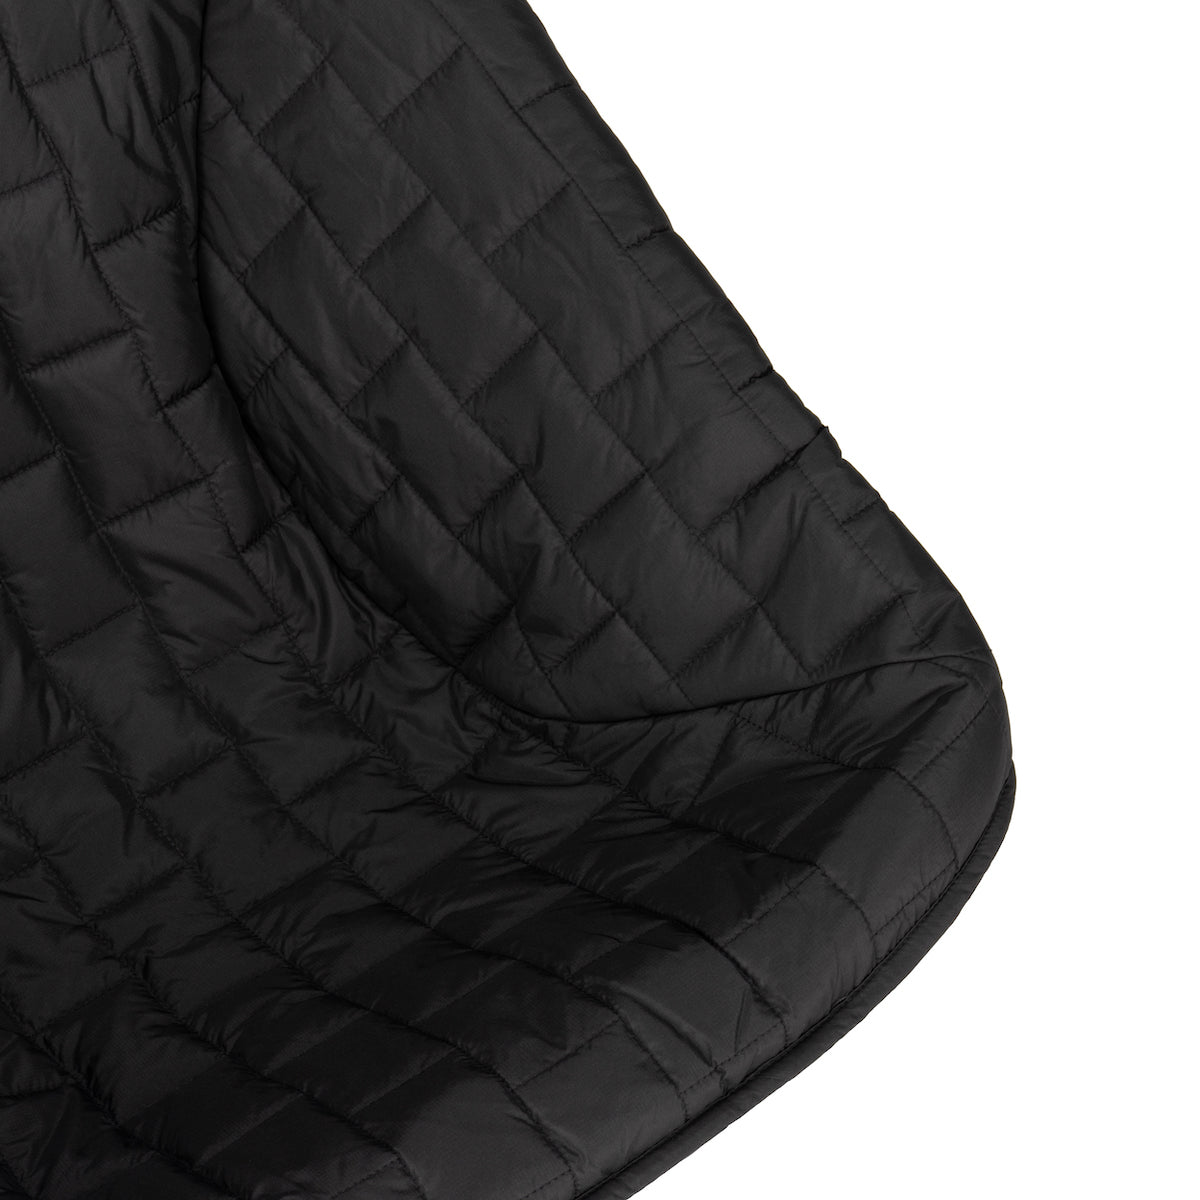 Seat Warmer for Chair One - Black/Coyote Tan